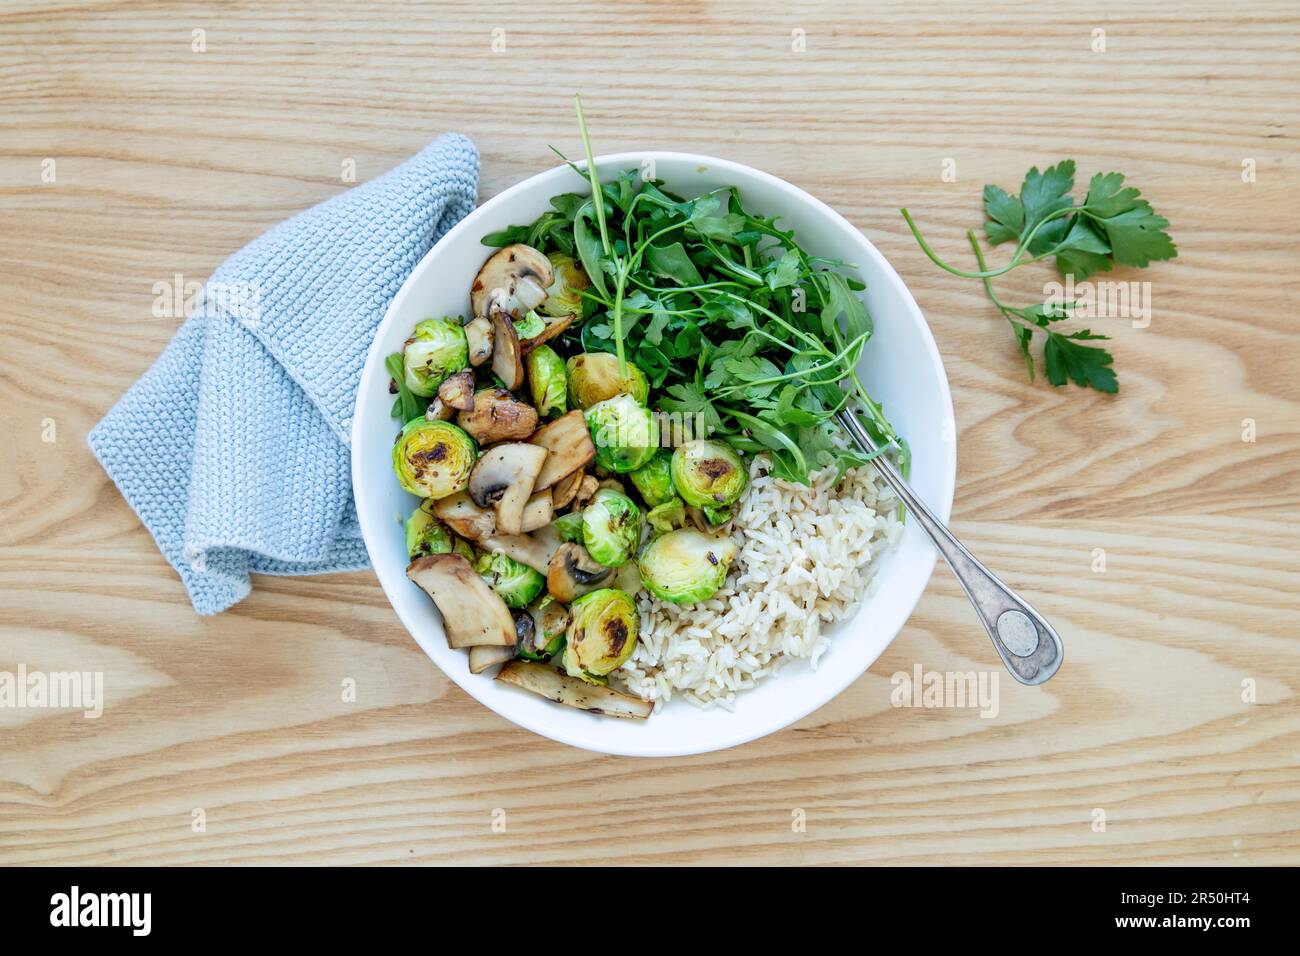 Mushroom and Brussels sprouts with rice in a bowl Stock Photo